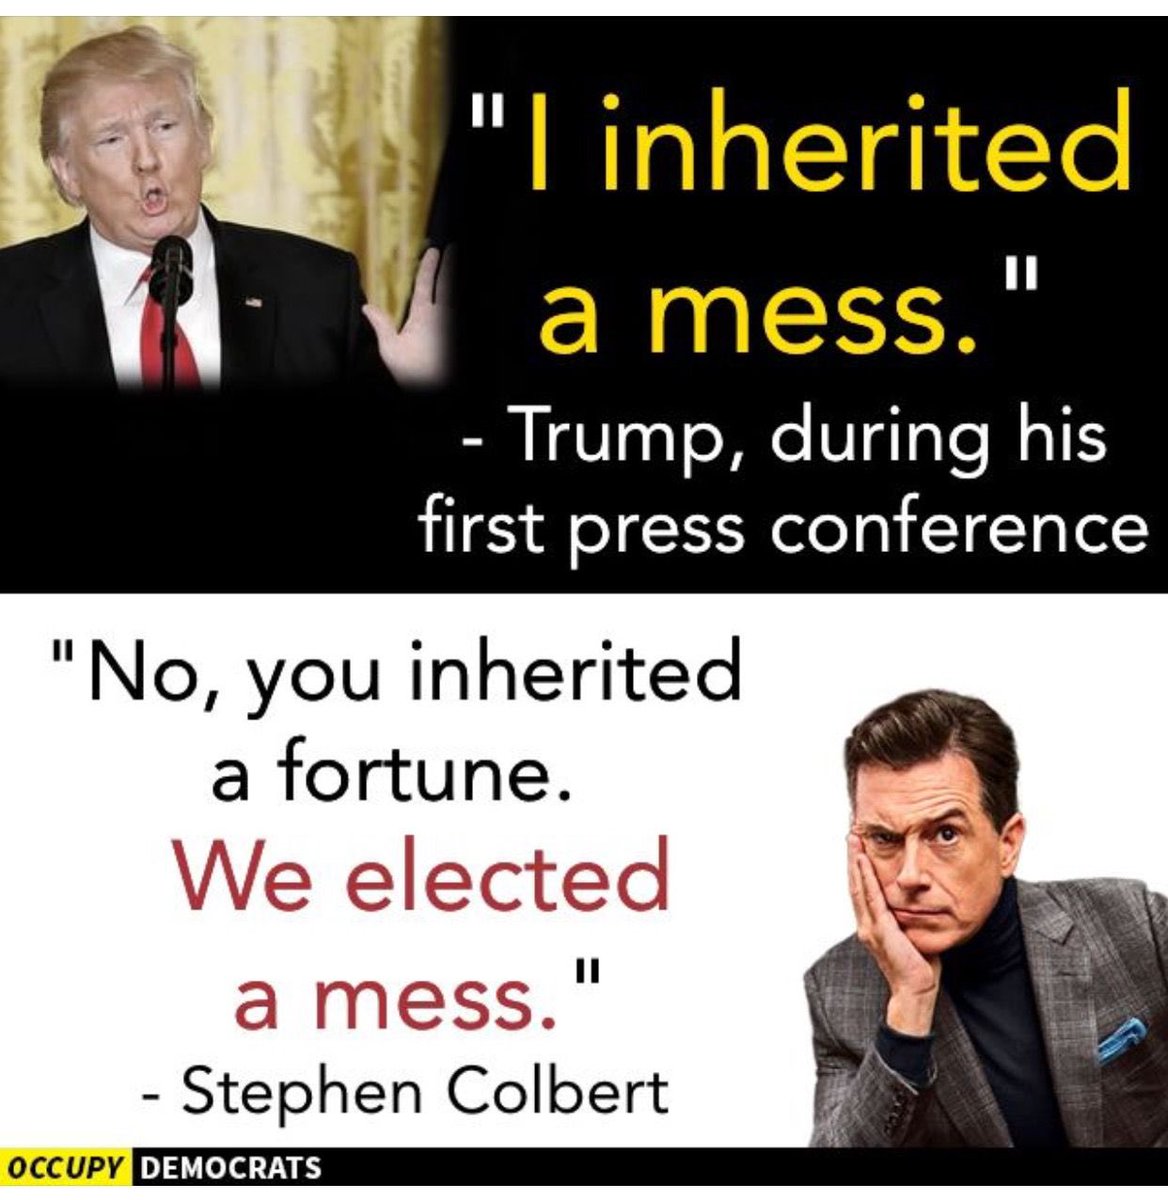 Stephen Colbert being absolutely right as usual